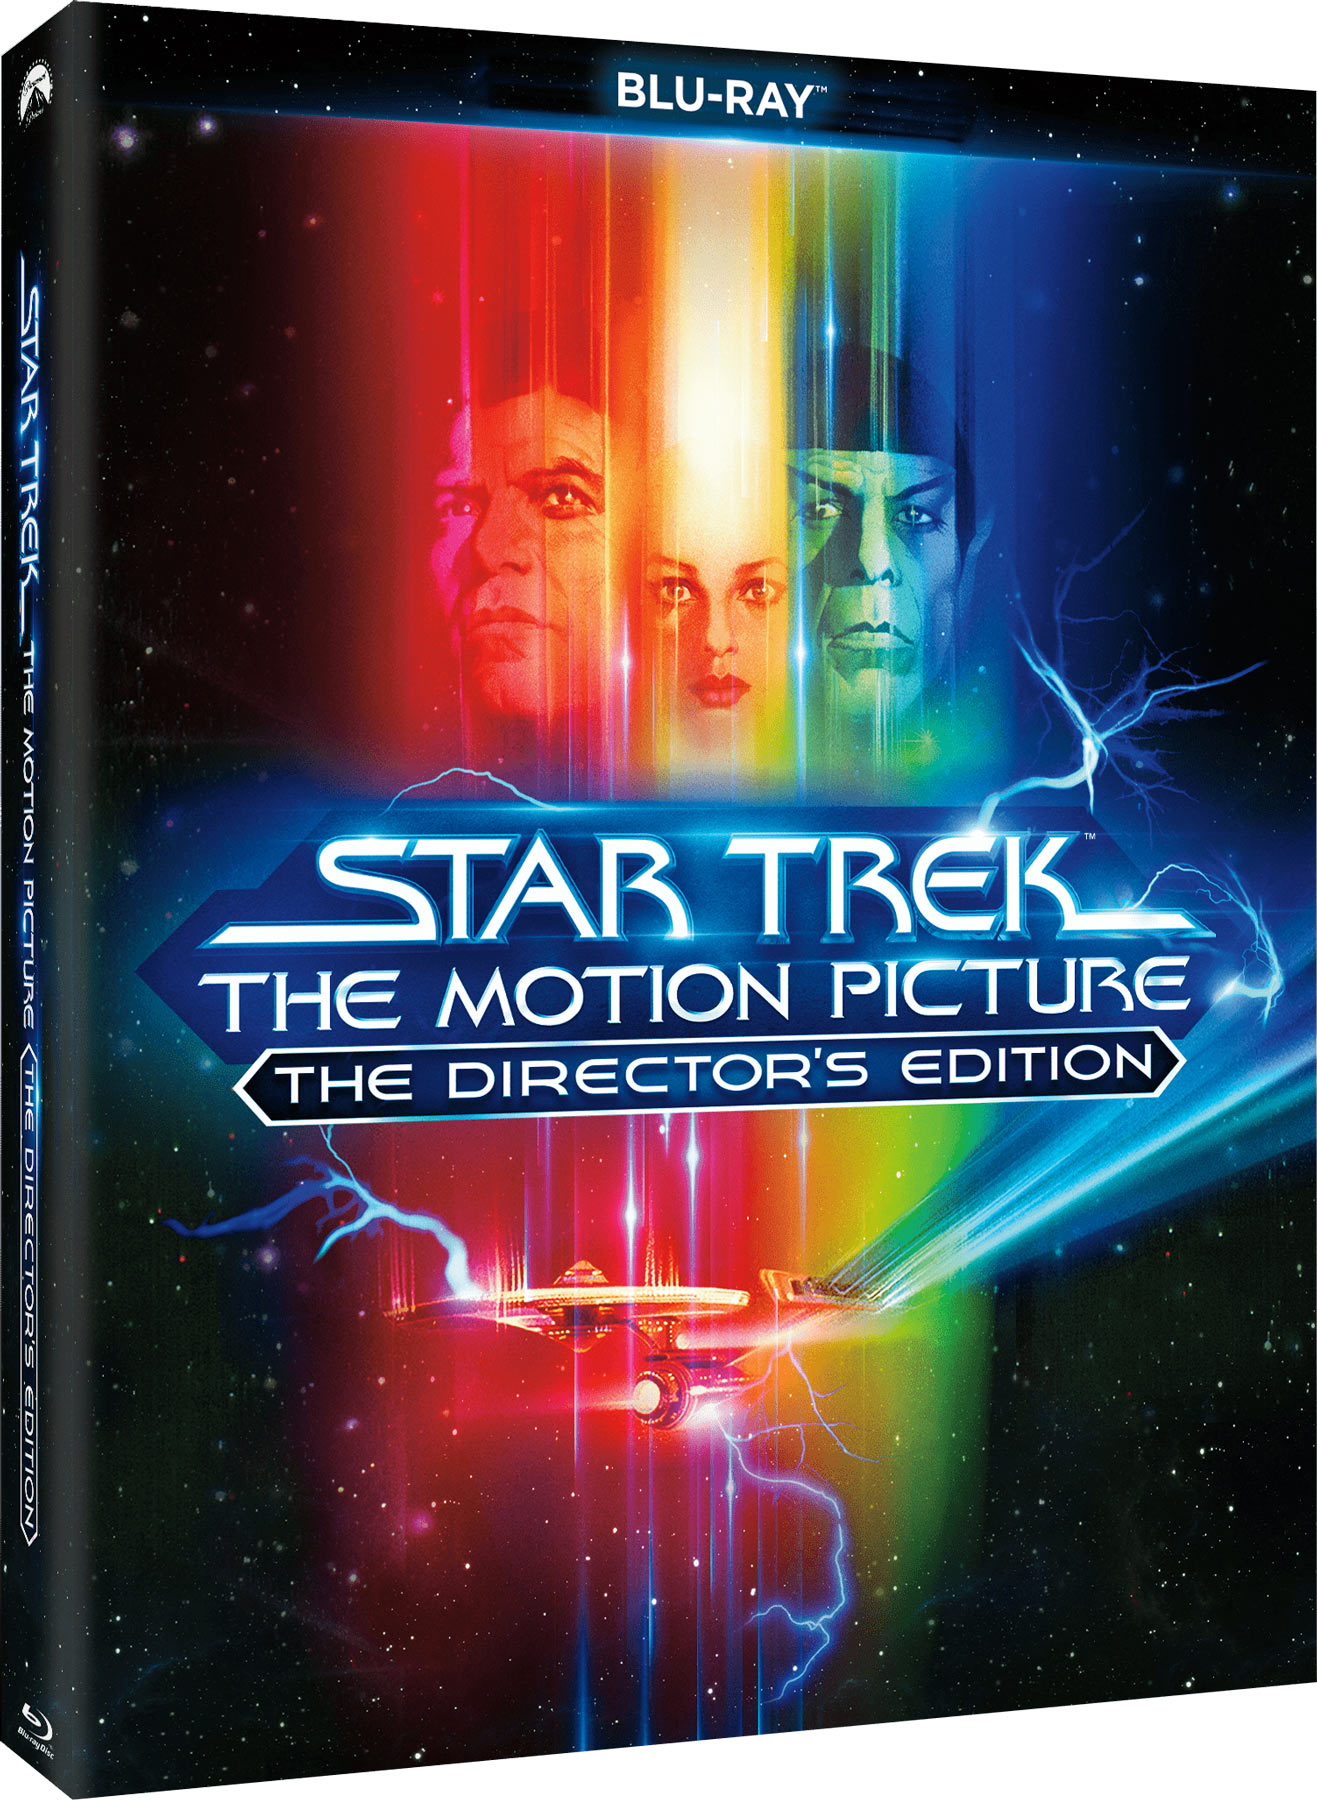 Star Trek The Motion Picture - The Director's Edition - Blu-ray